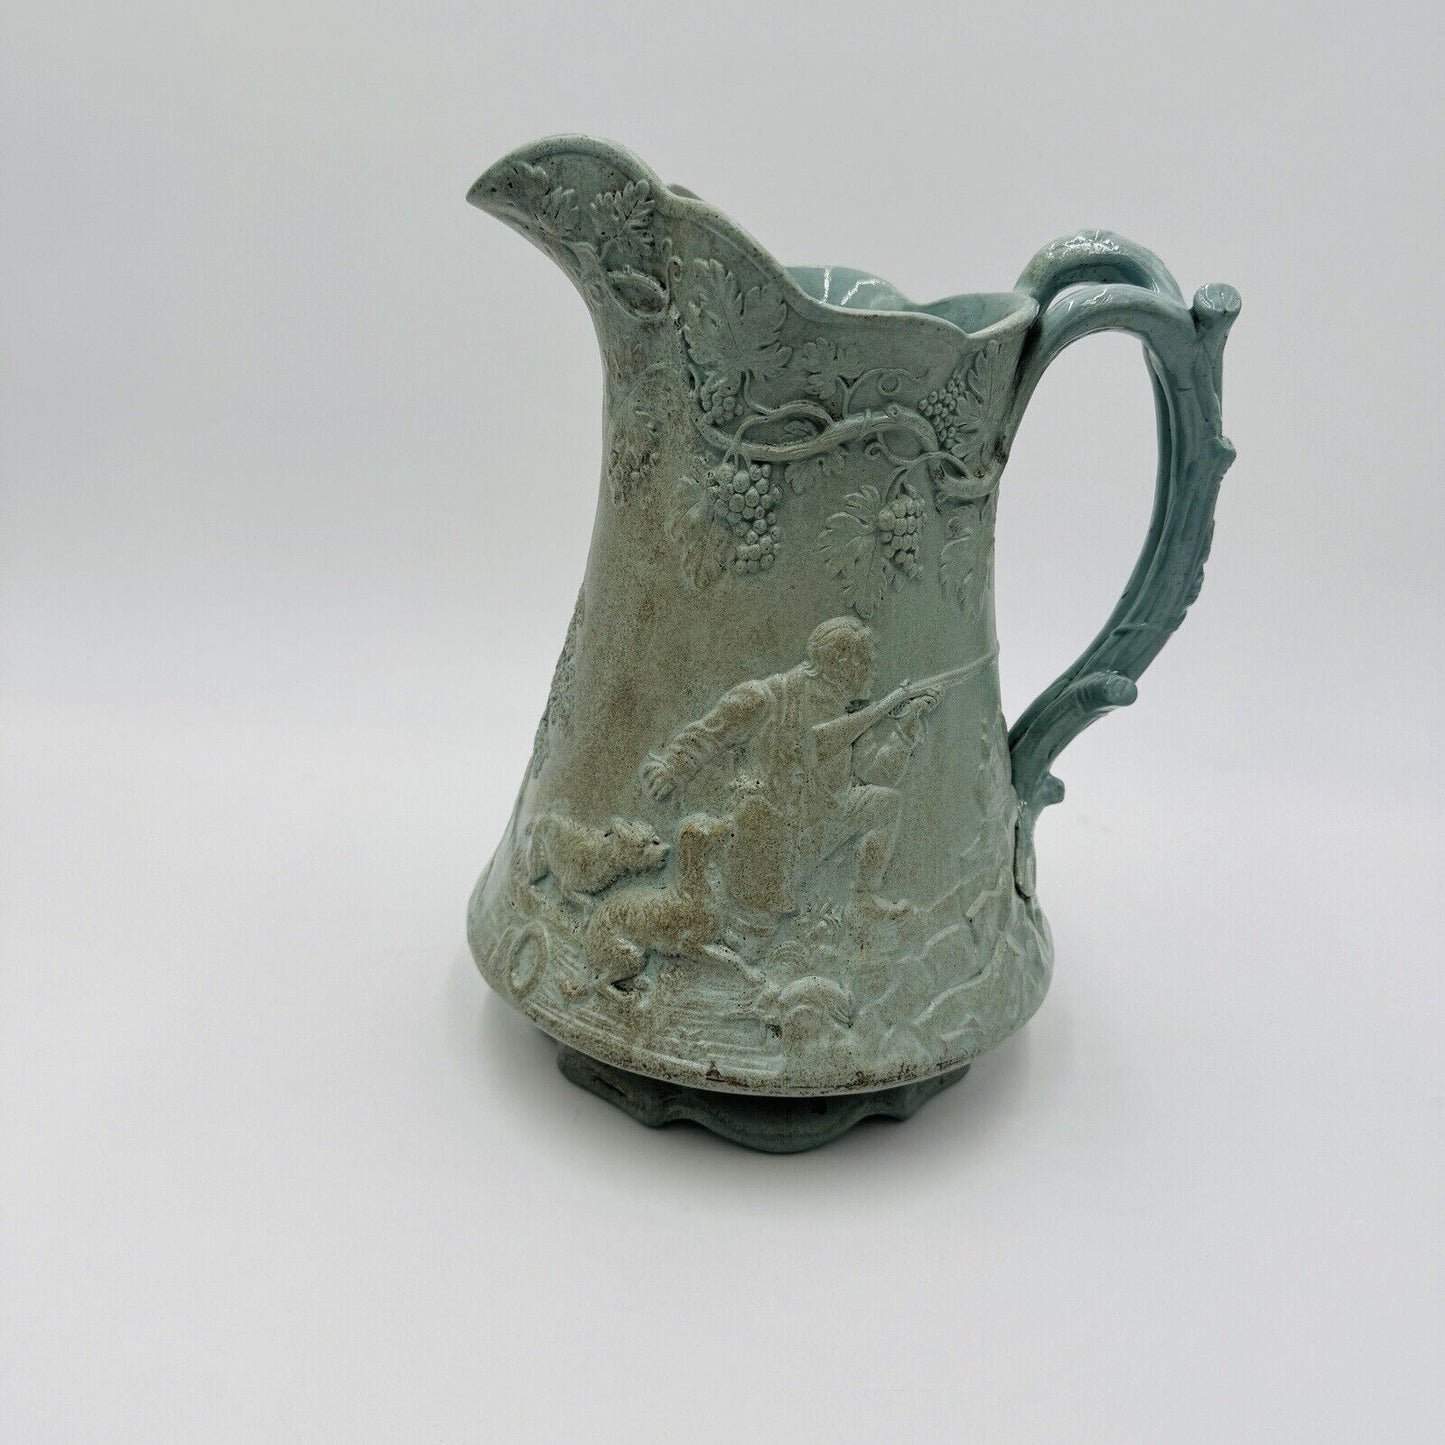 Antique Parian Ware Relief Jug Large Green Pottery Embossed Grapes